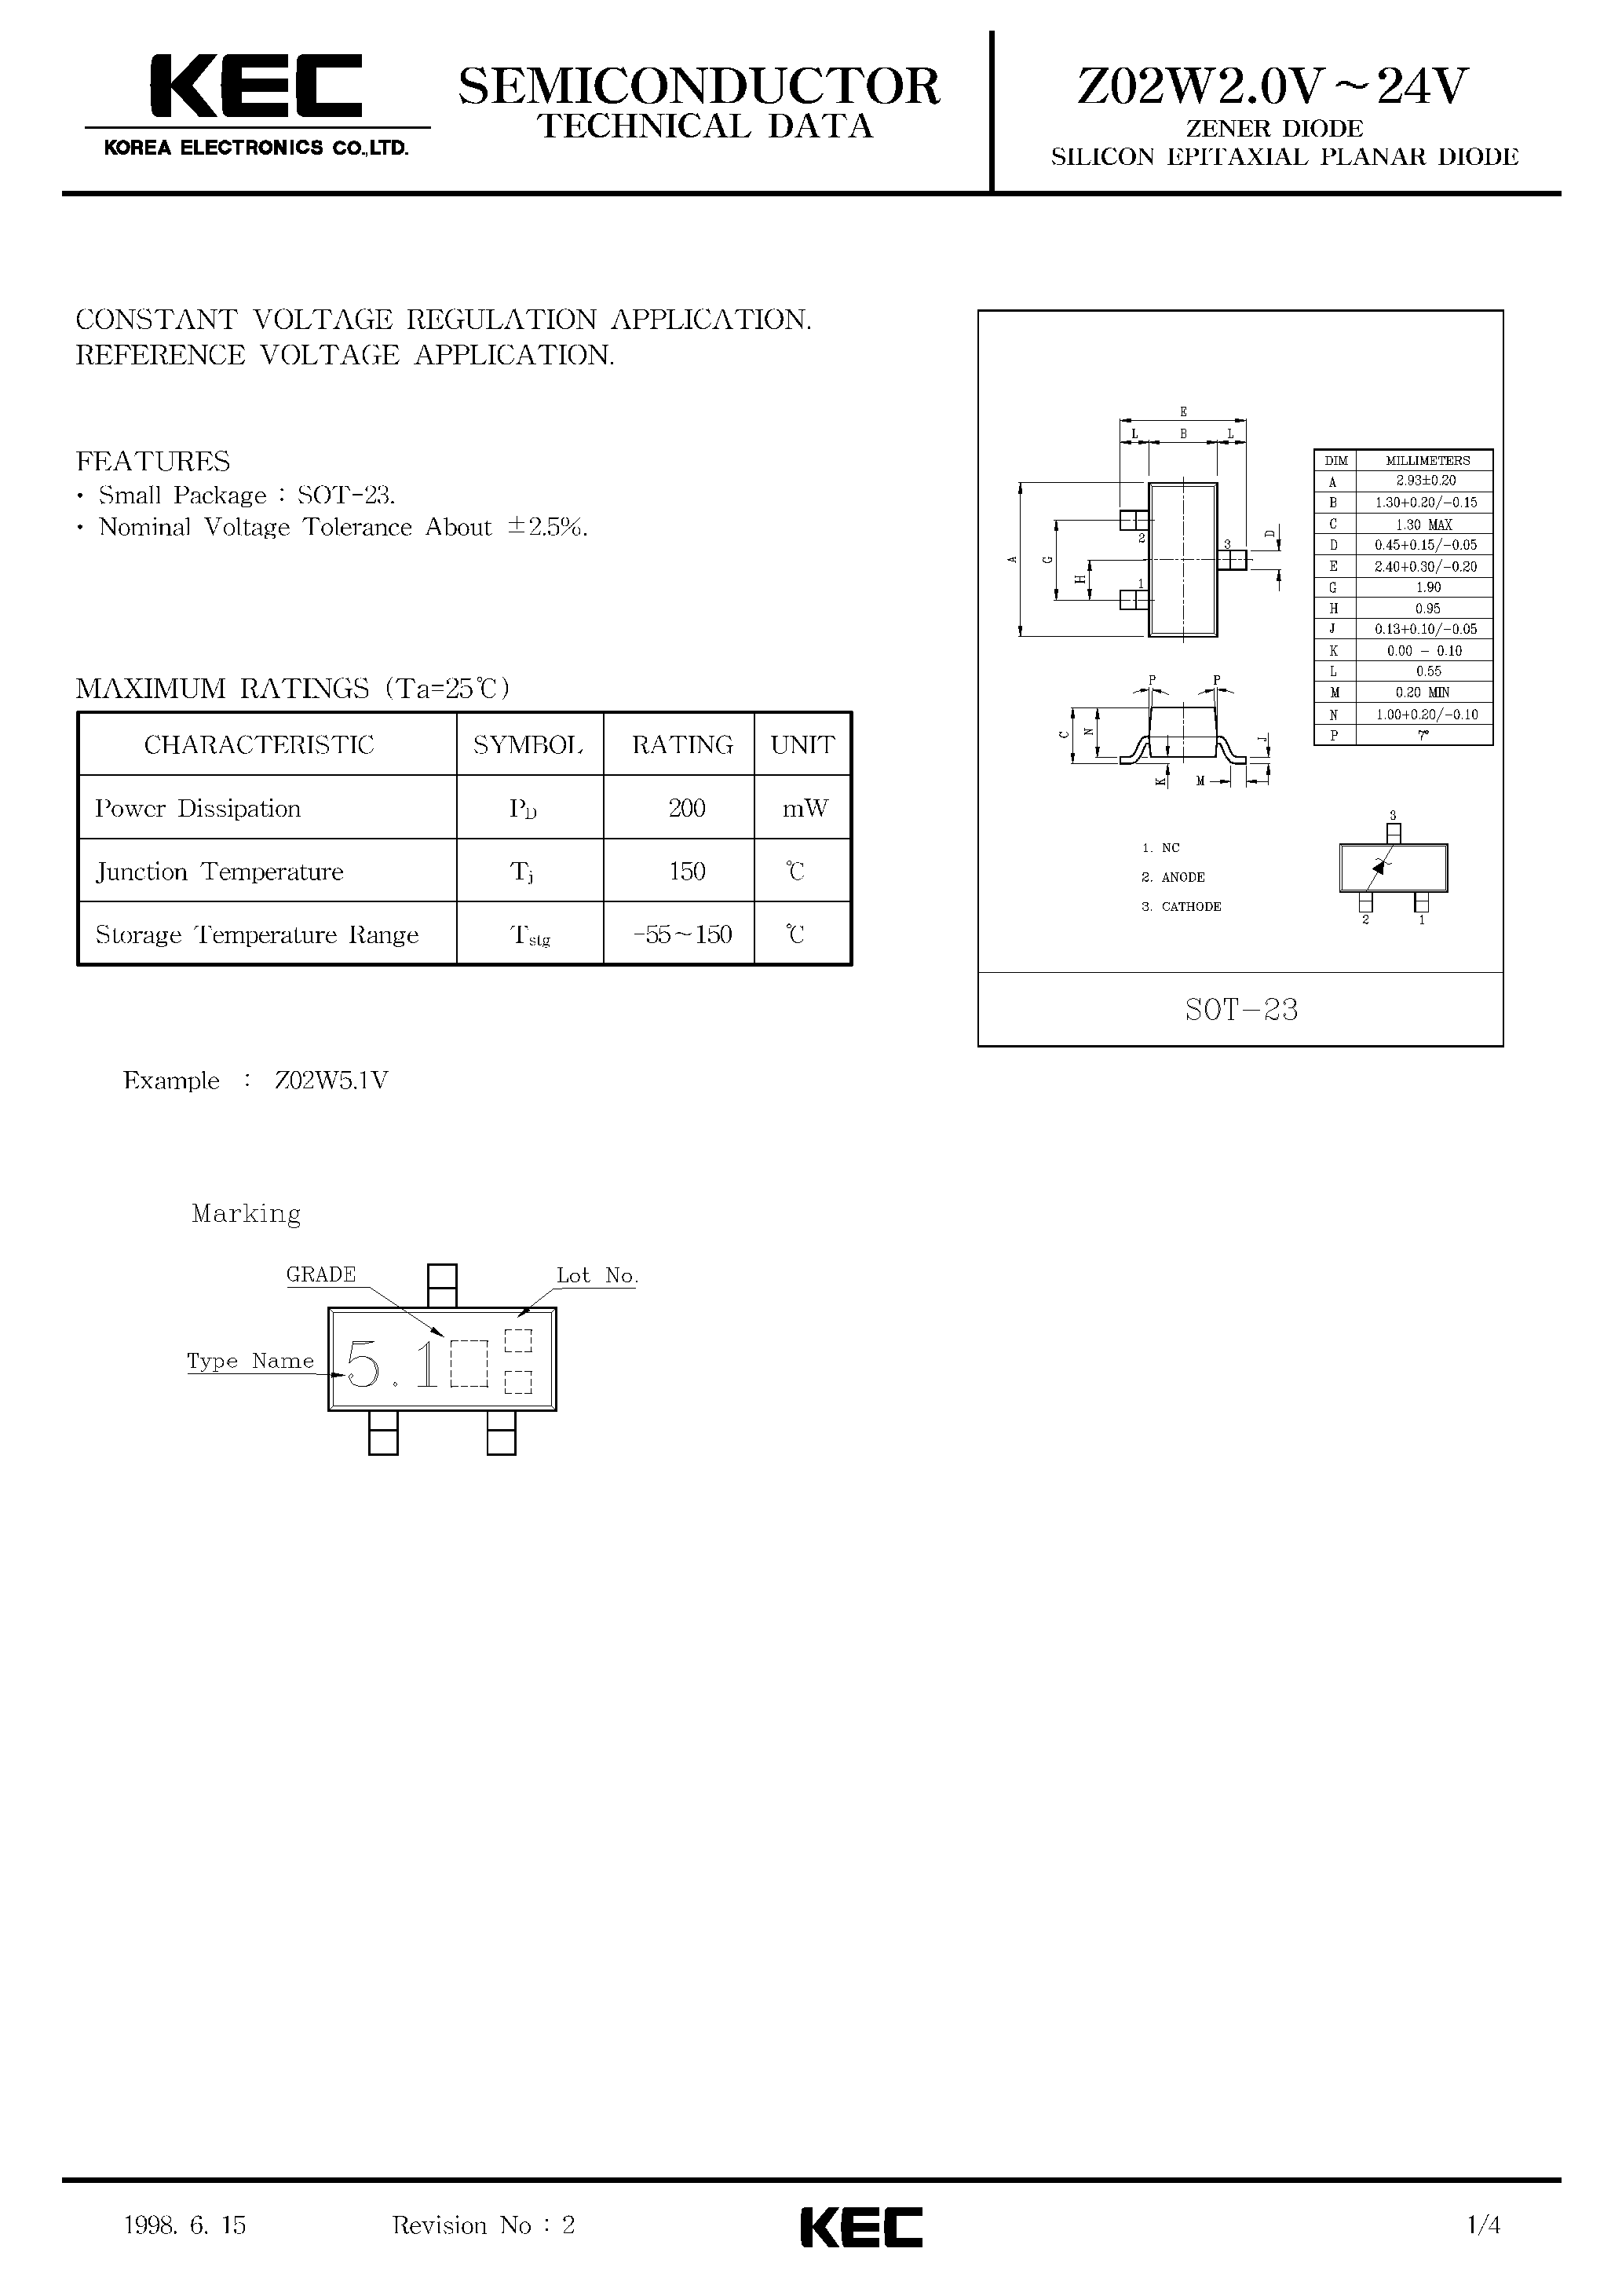 Datasheet Z02W6.8V - ZENER DIODE SILICON EPITAXIAL PLANAR DIODE page 1